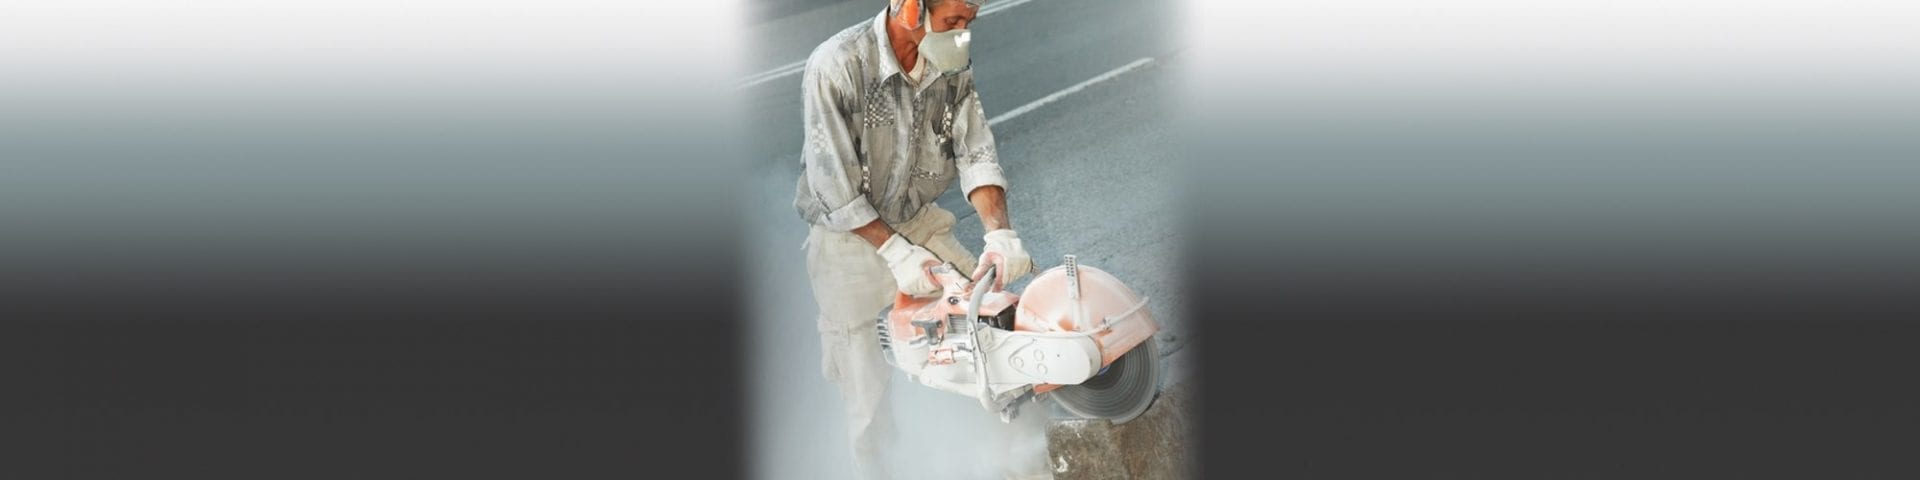 Crystalline Silica: Sampling of Workers for Respirable Silica – Alpha Quartz, Tridymite, Cristobalite